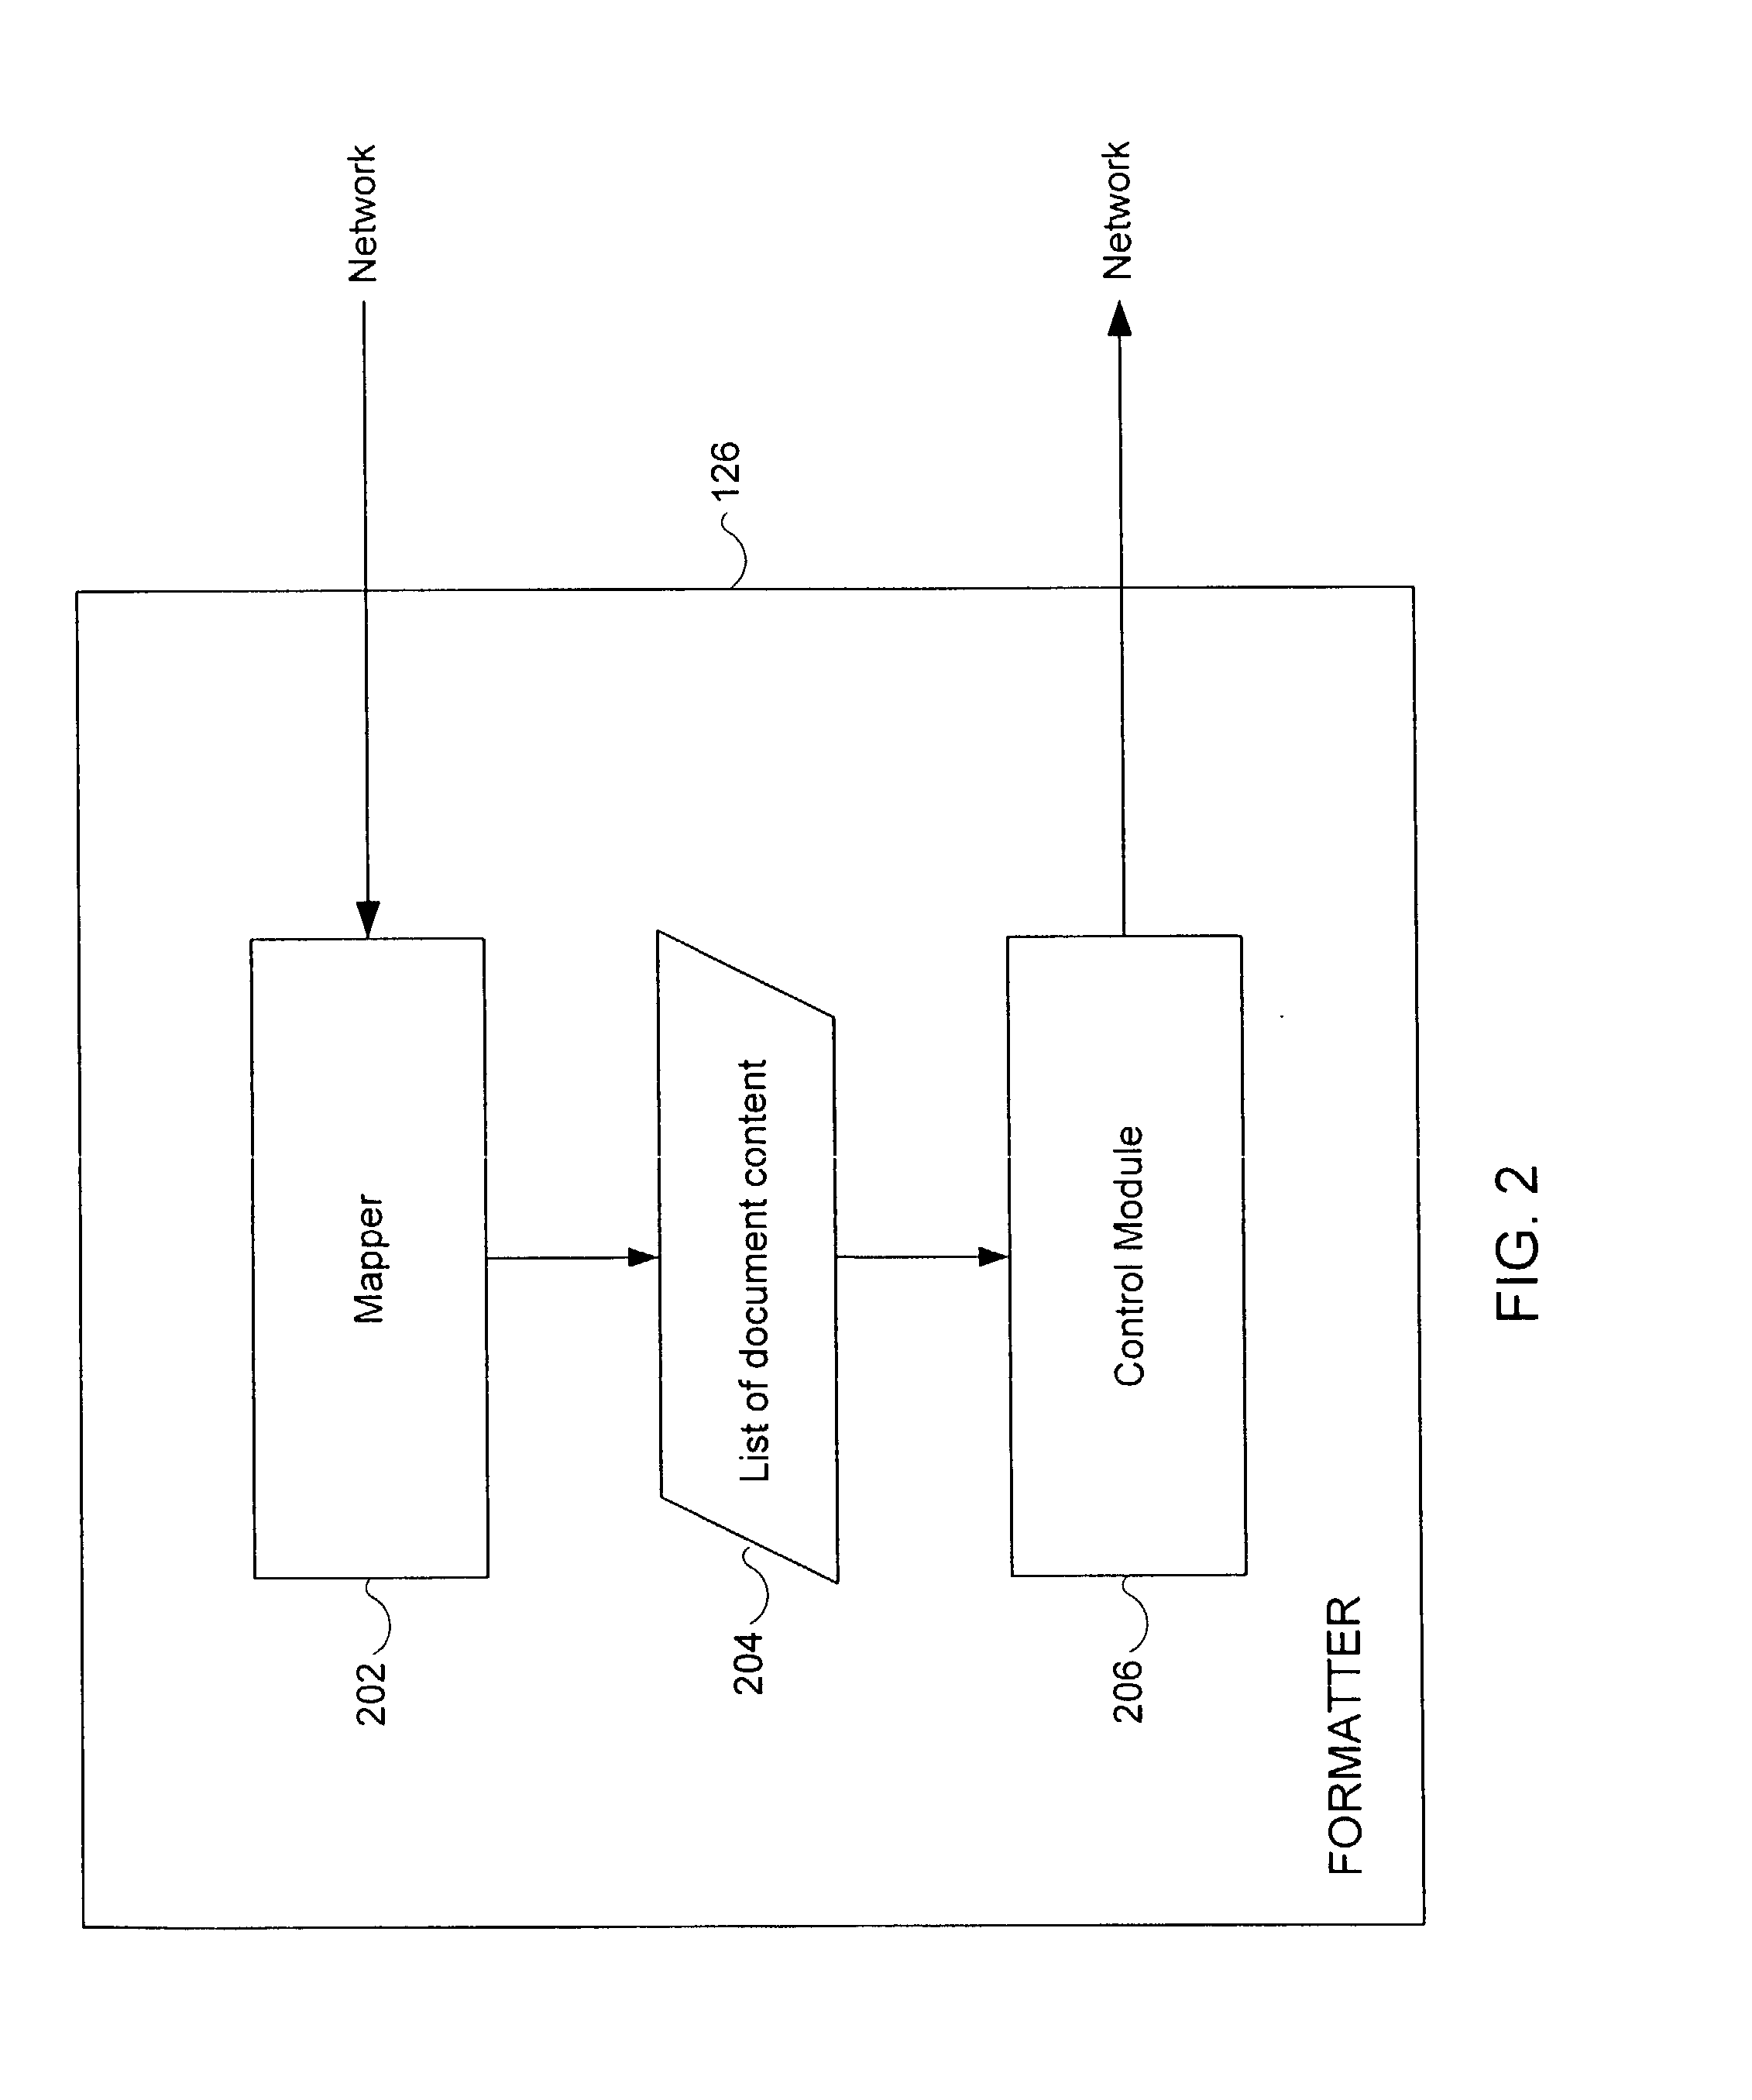 System and method for modifying a document format